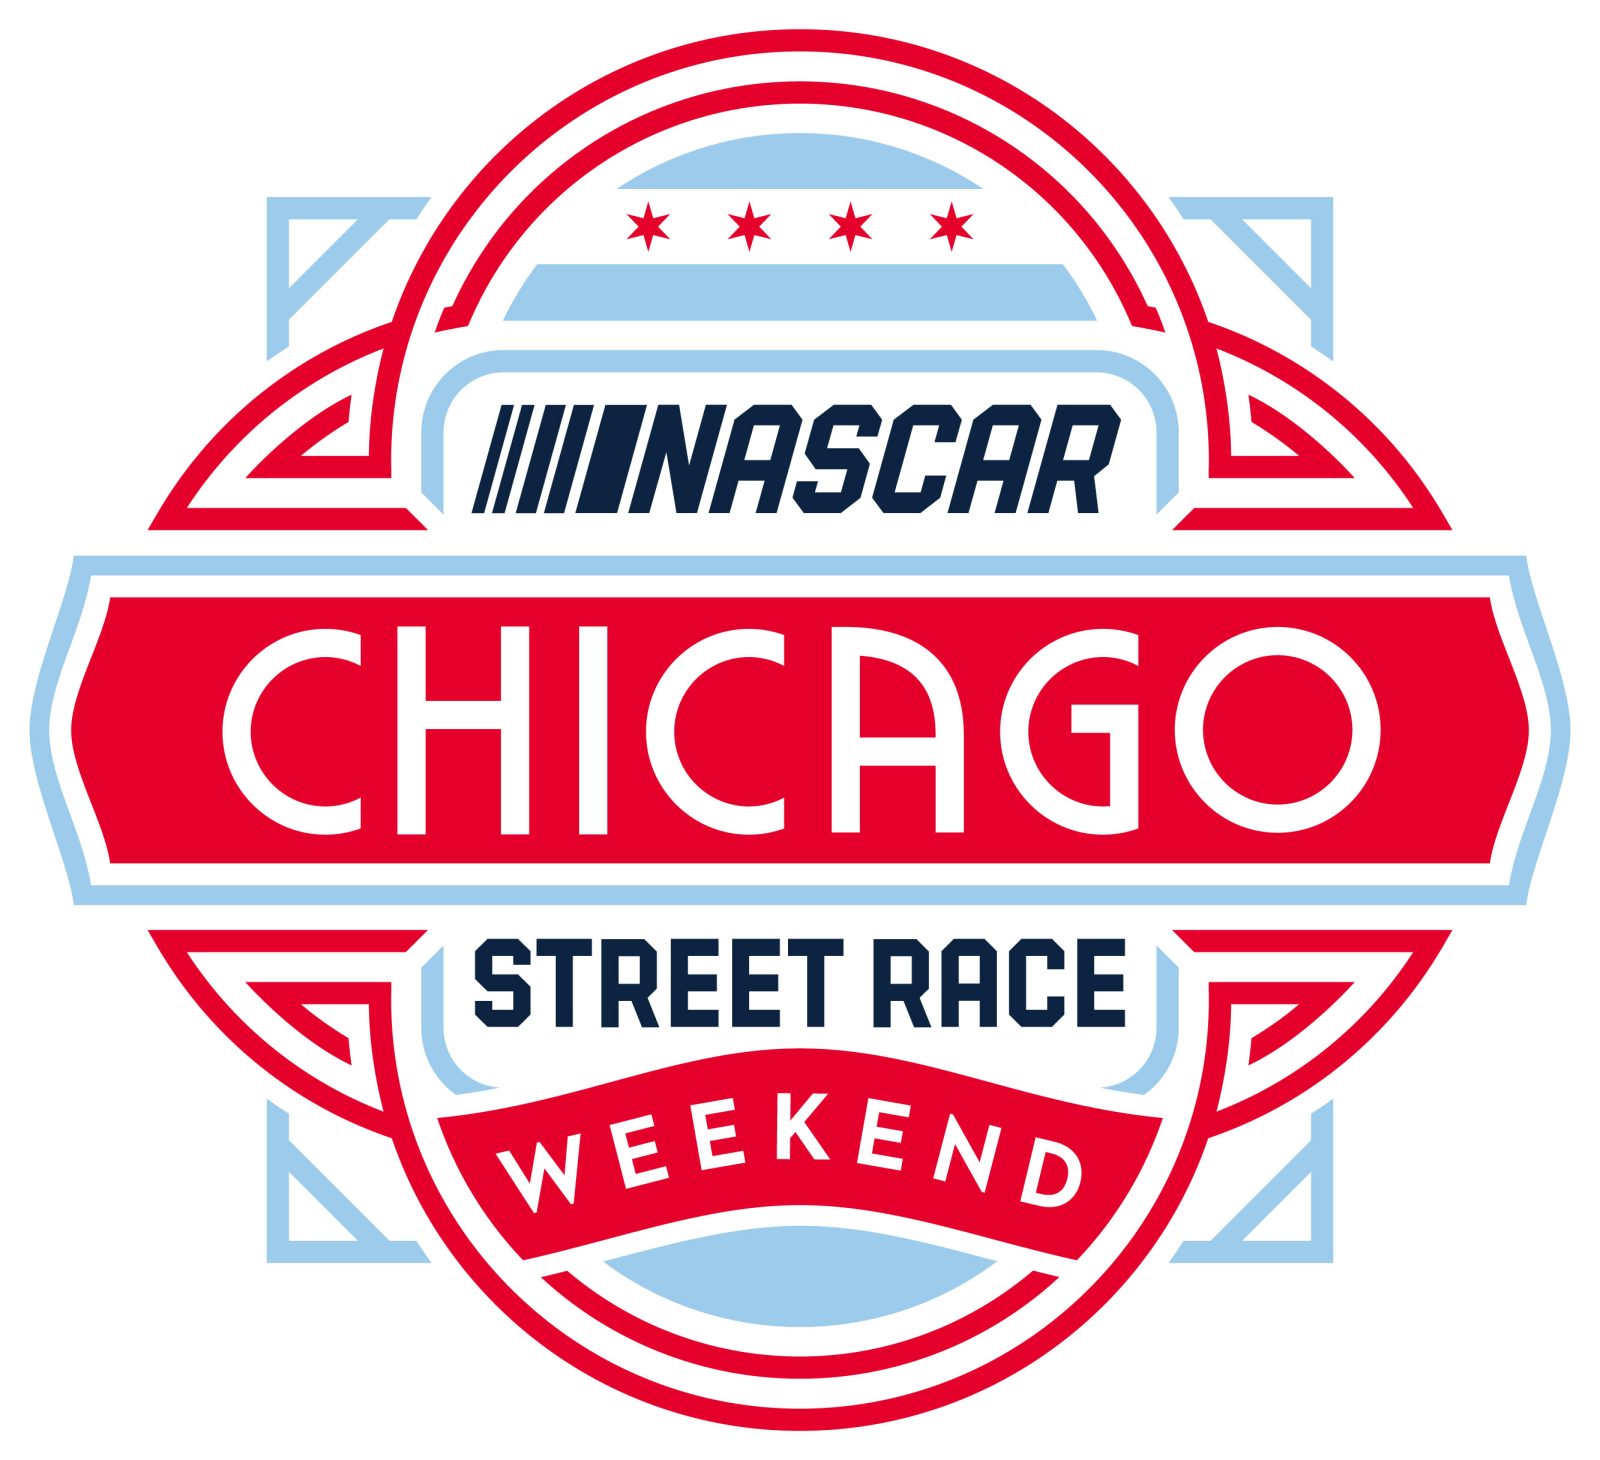 Chicago Street Race Rolls Out Local Resource Guide Powered by FanSaves